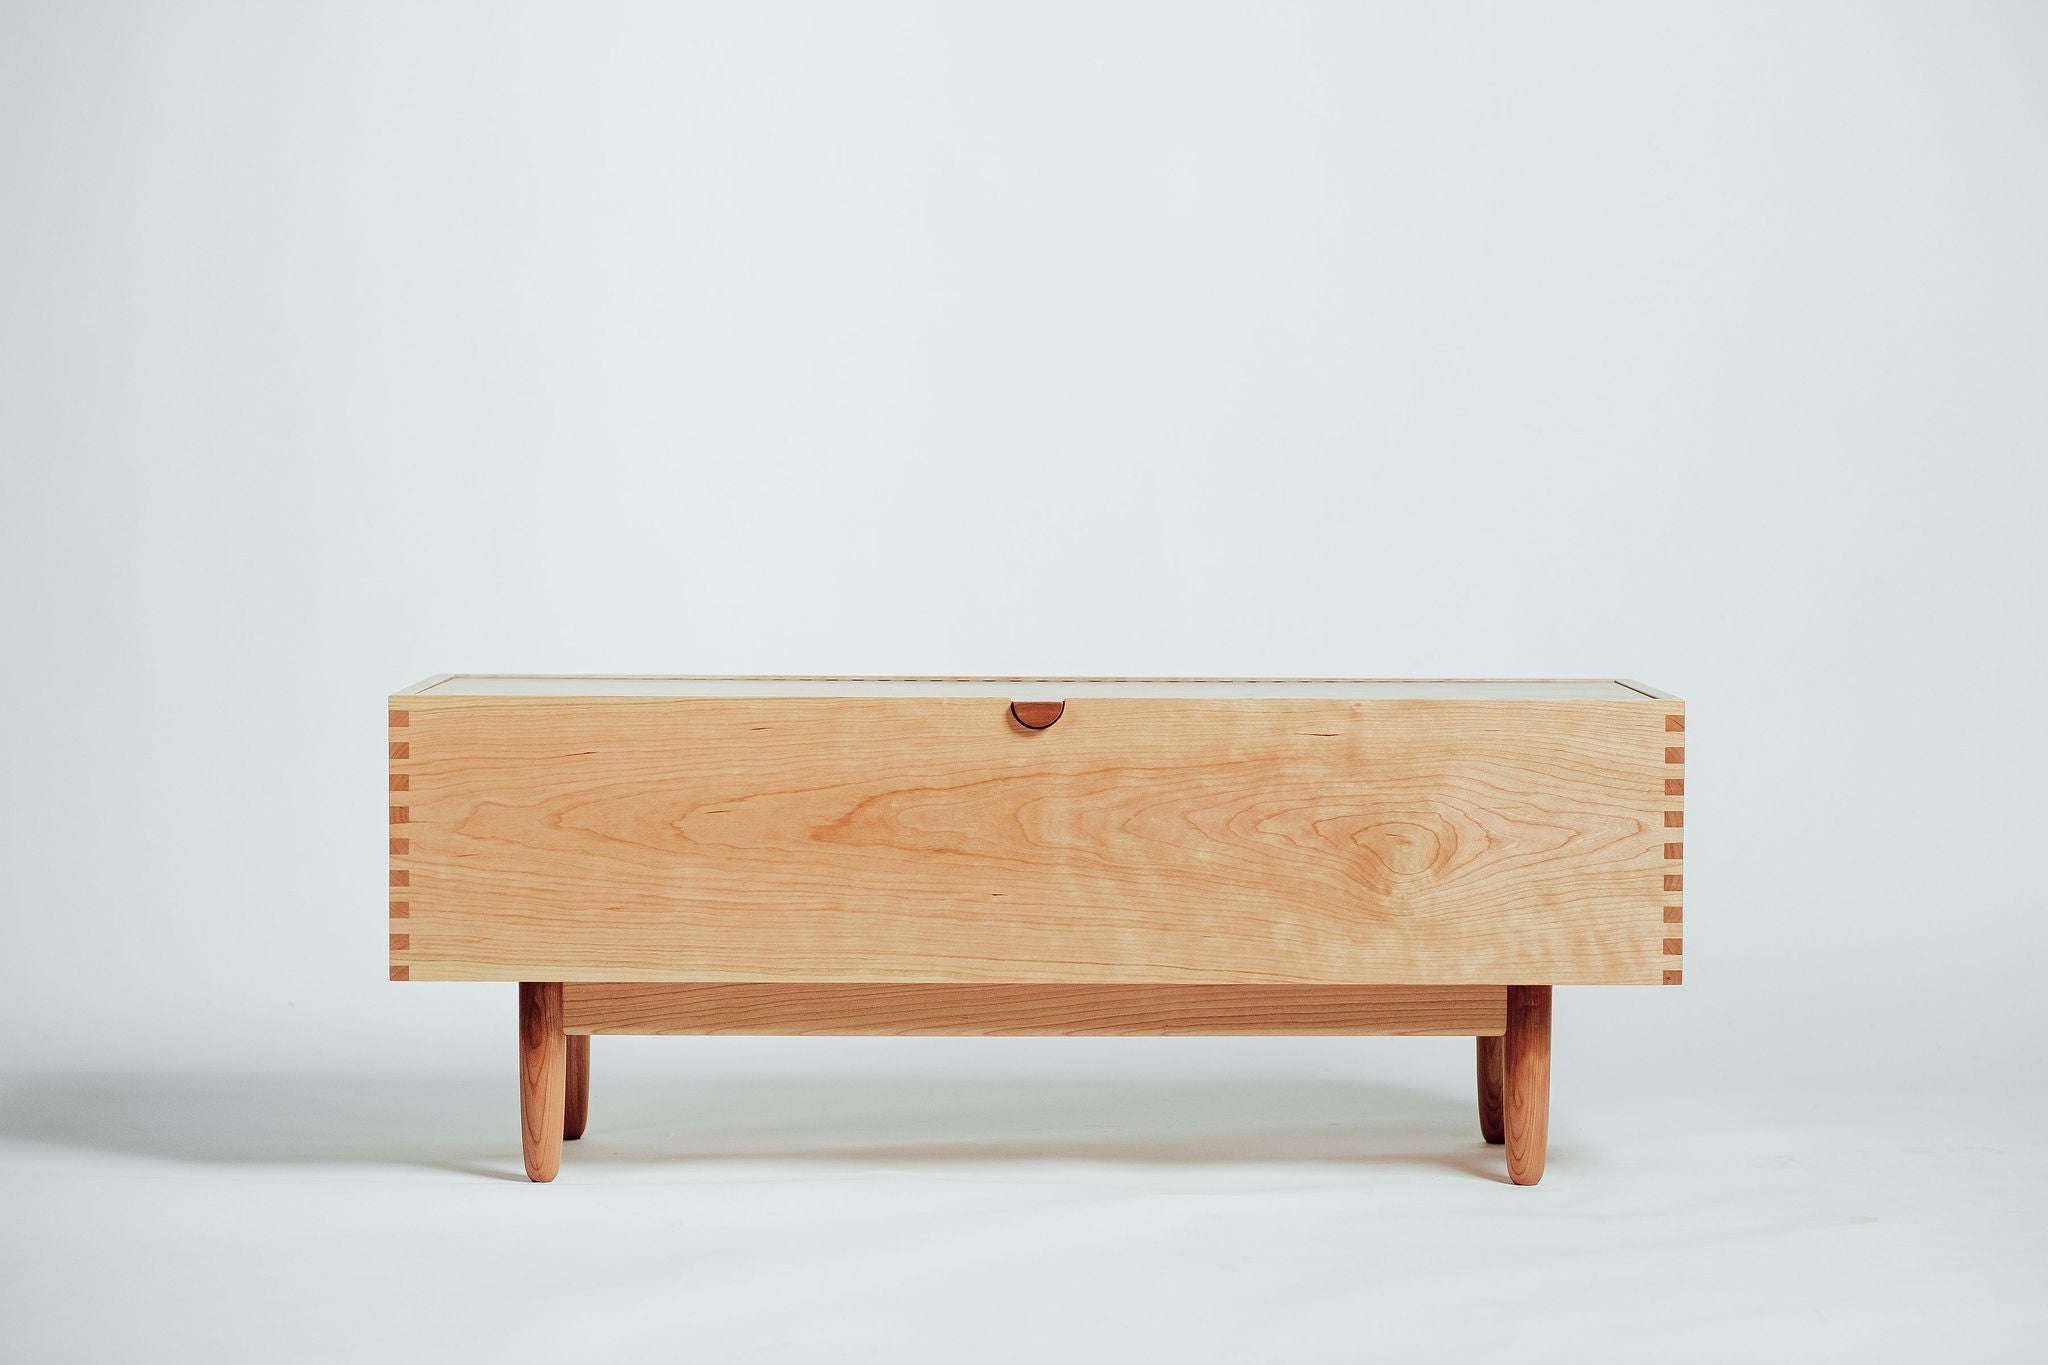 Haven midcentury modern cherry wood blanket chest handcrafted by Hunt & Noyer in Michigan